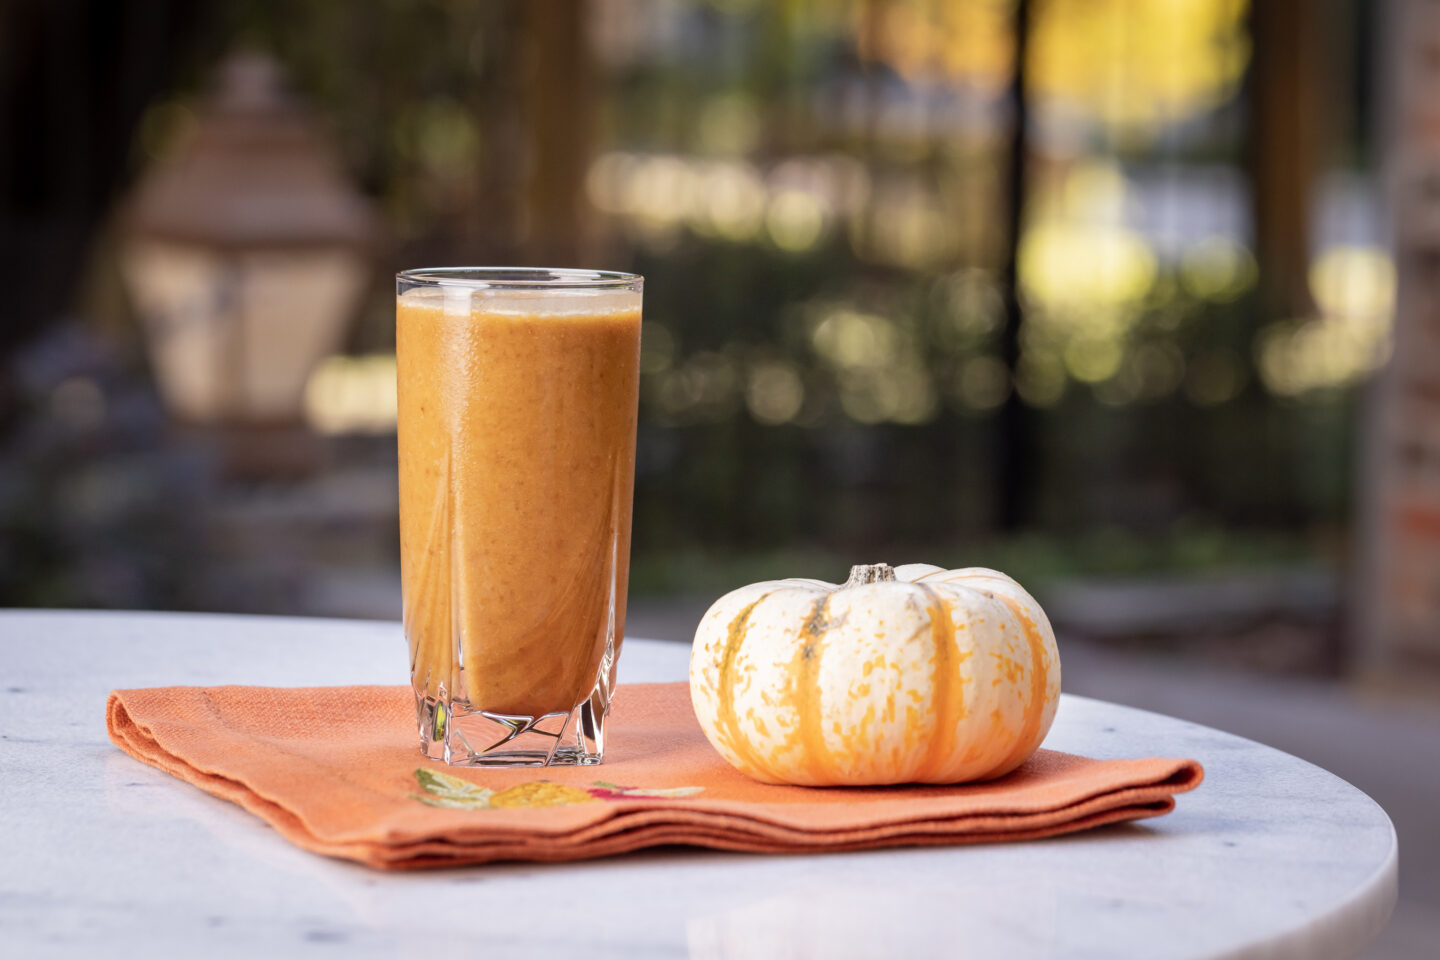 Collagen + Adaptogen Pumpkin Spice Latte Smoothie with fresh pumpkin and Vital Proteins Collagen Coffee  featured by top Dallas lifestyle blogger, Pretty Little Shoppers